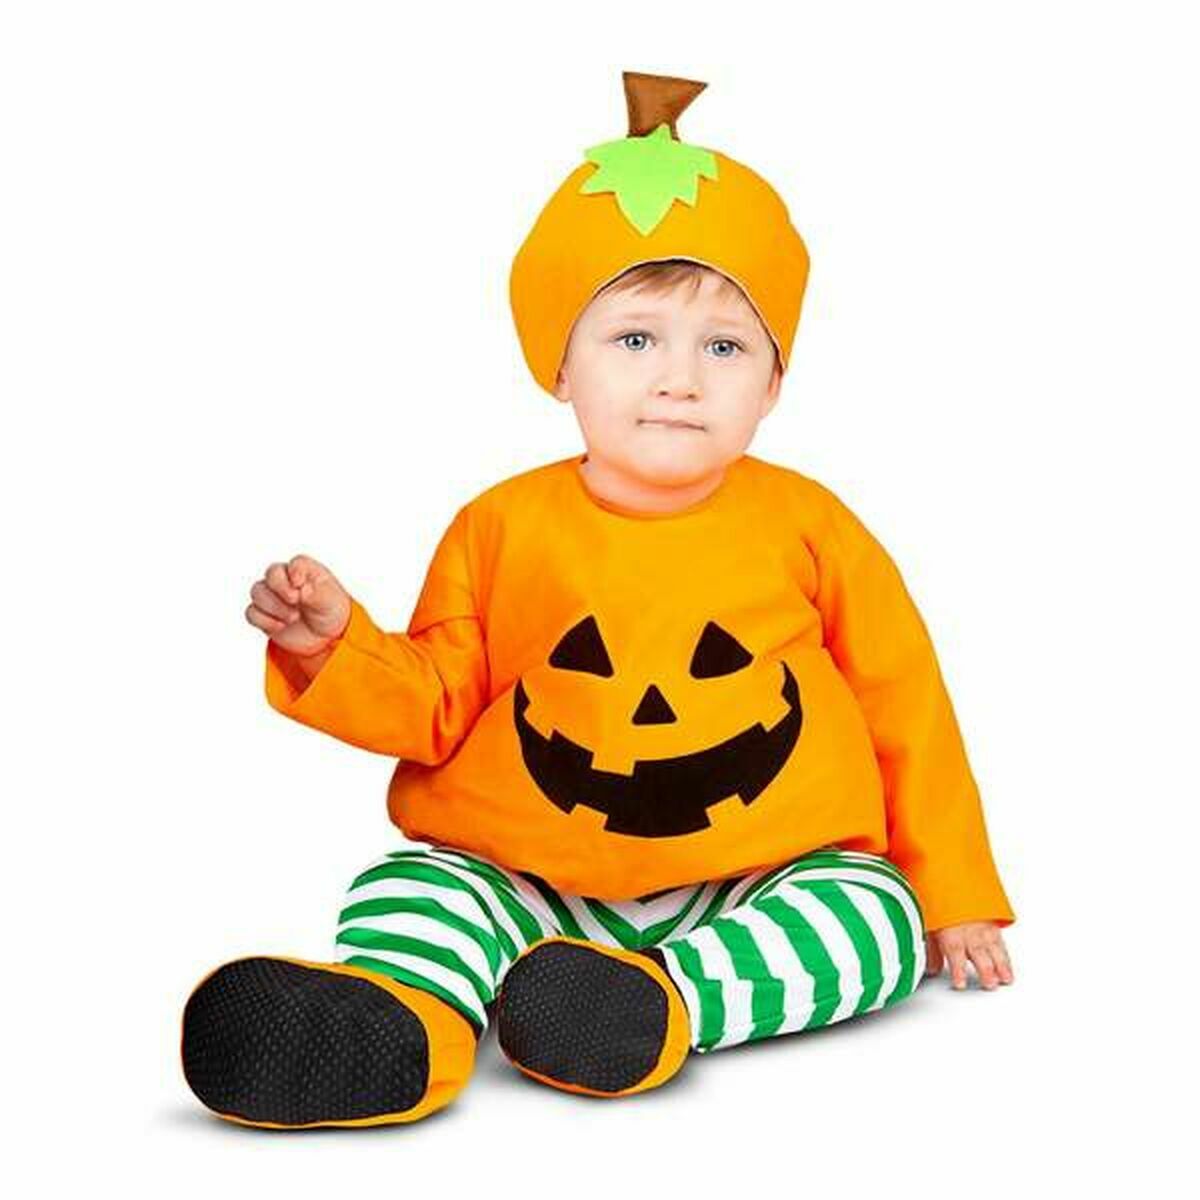 Costume for Babies My Other Me Pumpkin 4 Pieces (4 Pieces)